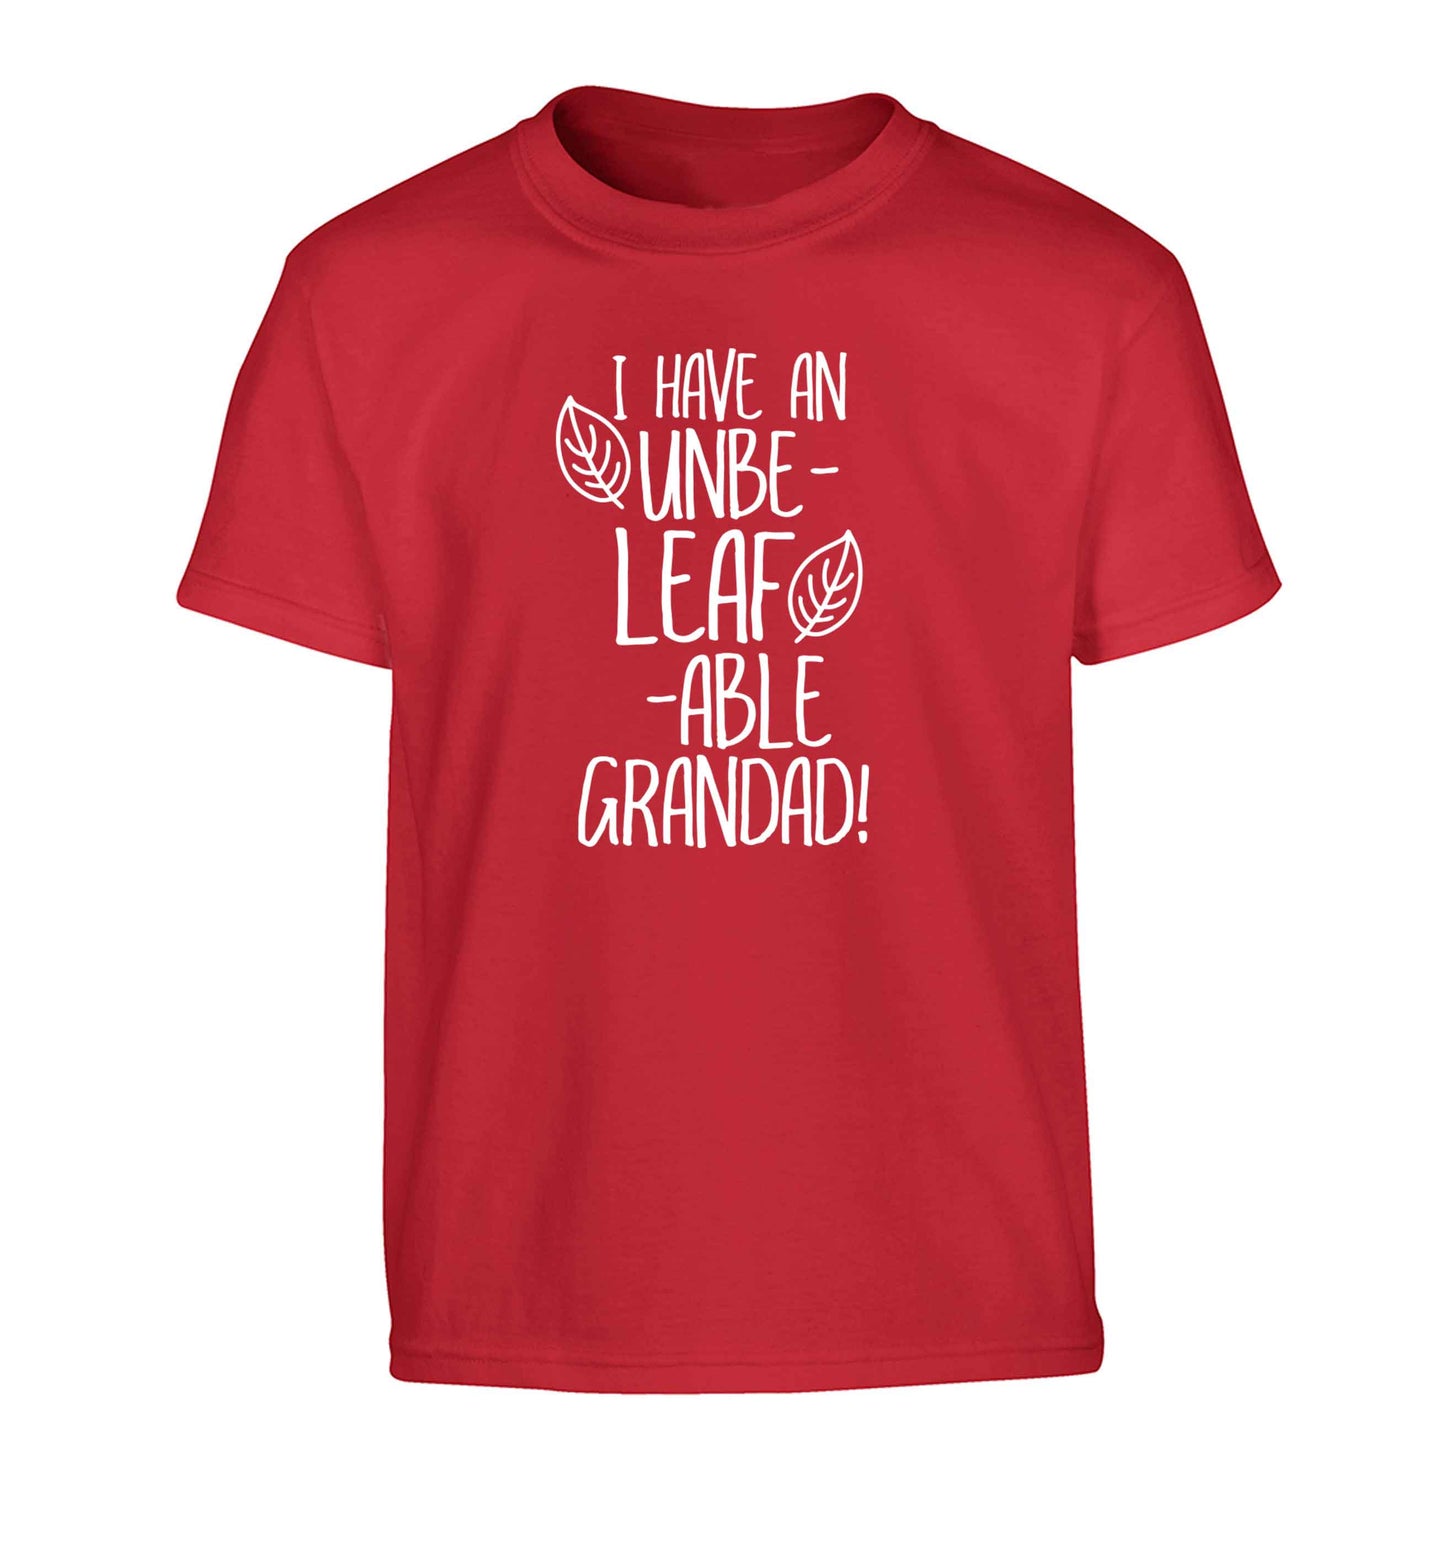 I have an unbe-leaf-able grandad Children's red Tshirt 12-13 Years